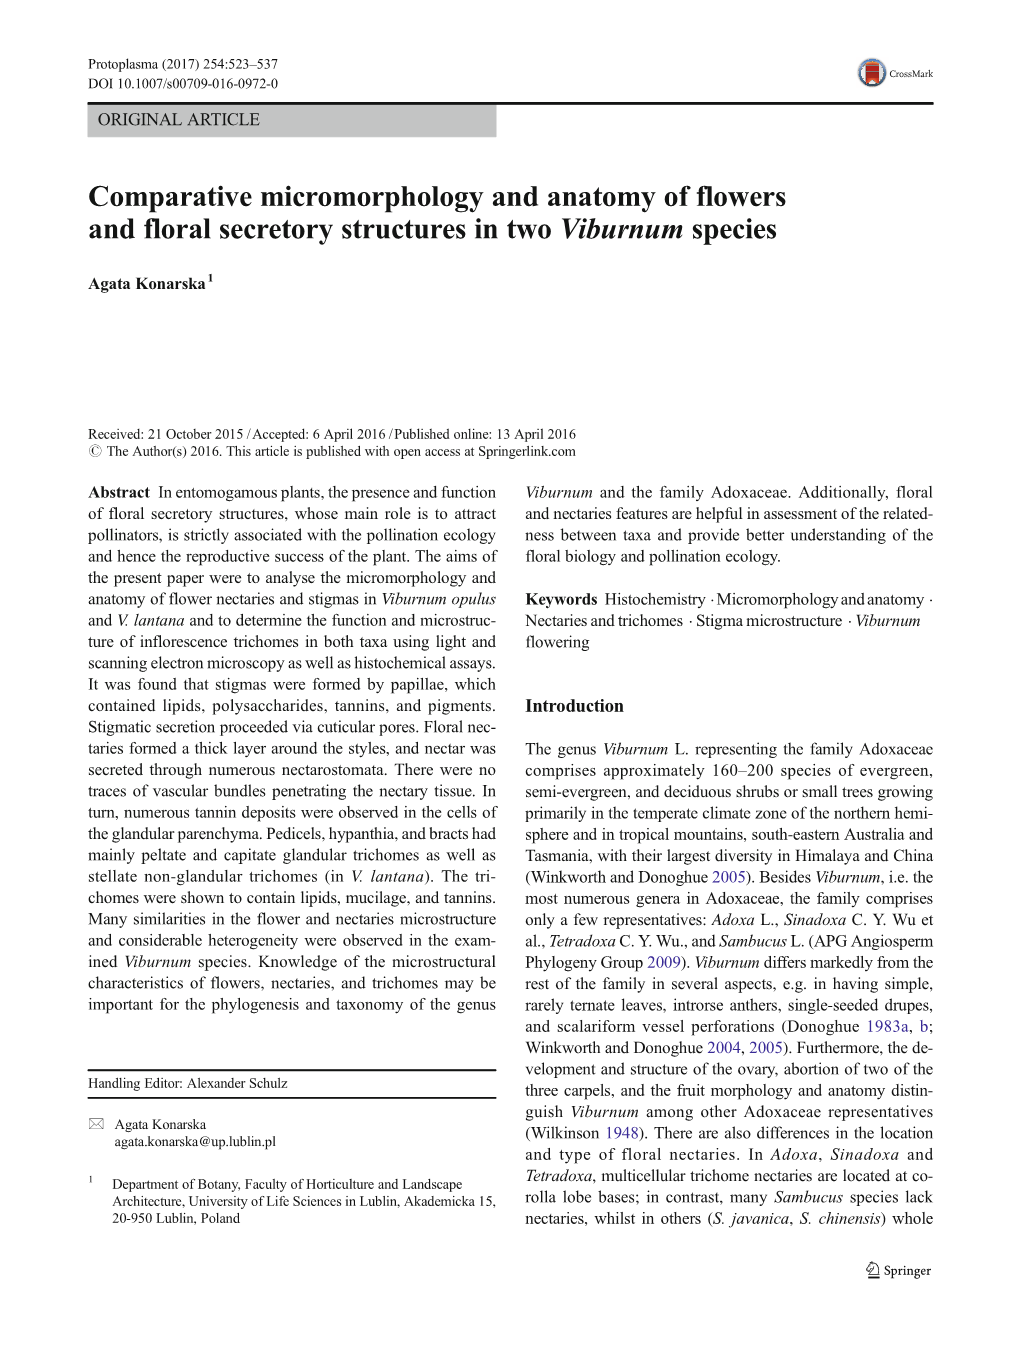 Comparative Micromorphology and Anatomy of Flowers and Floral Secretory Structures in Two Viburnum Species